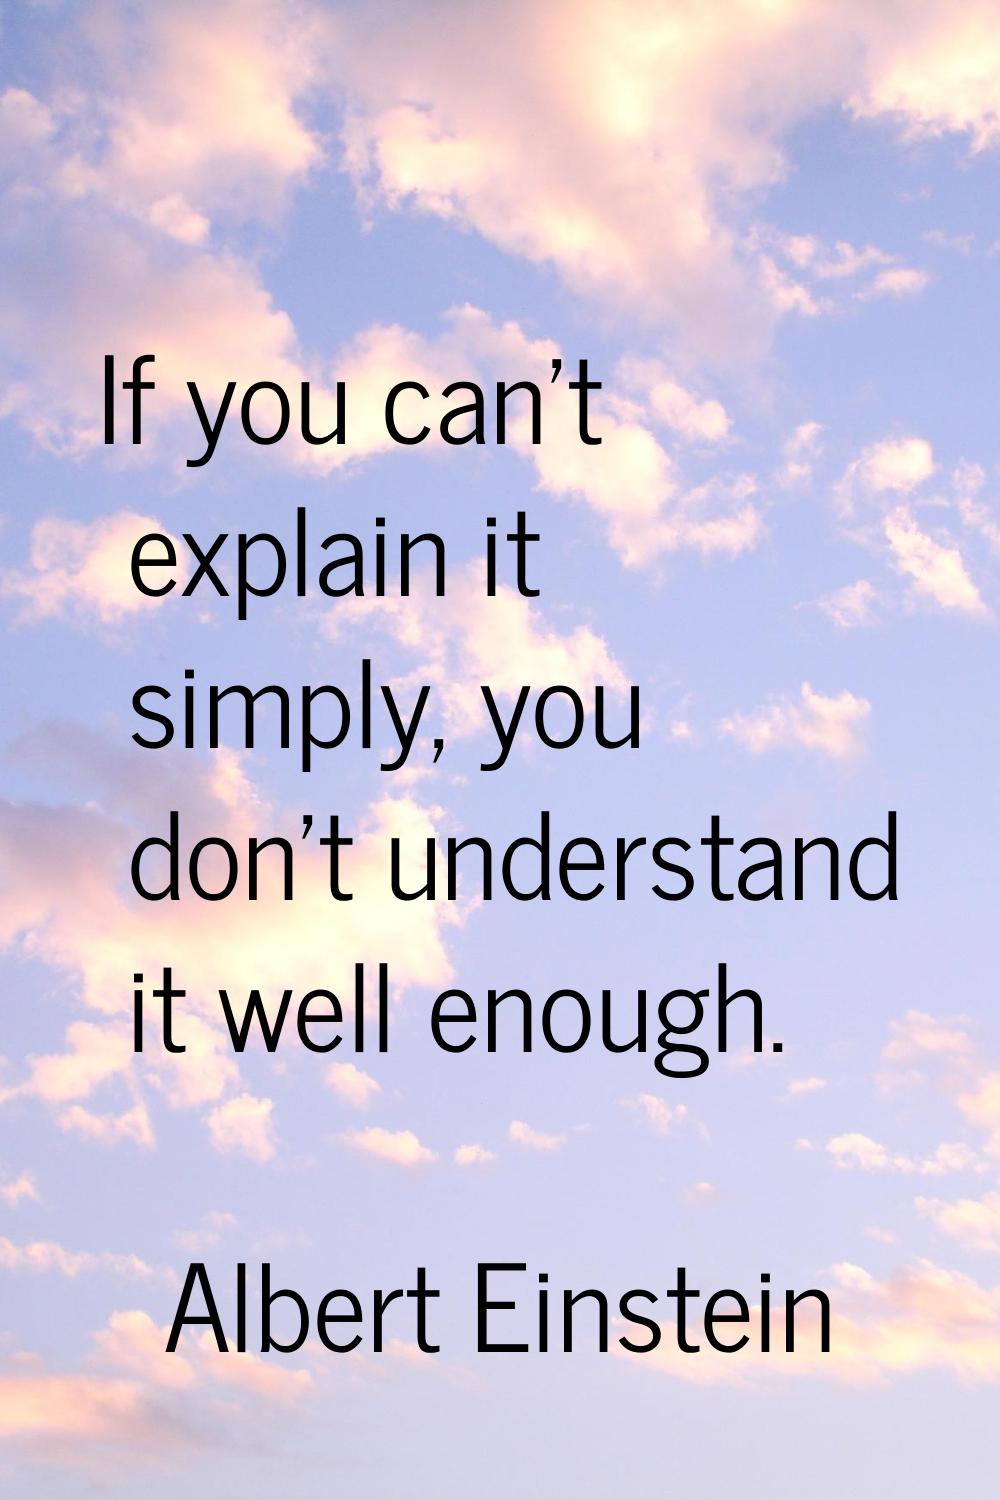 If you can't explain it simply, you don't understand it well enough.